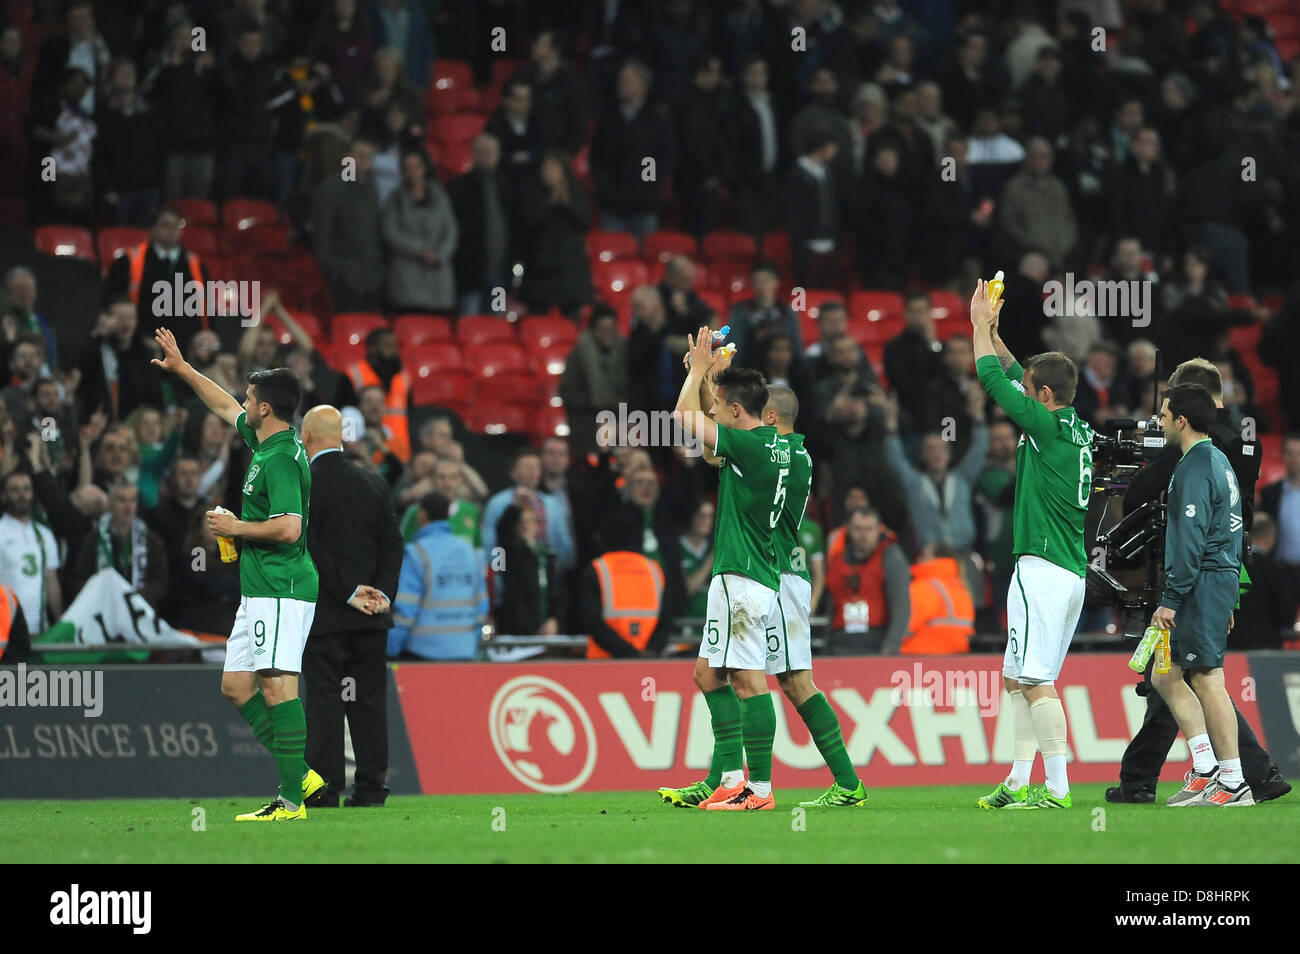 29.05.2013 London, England. Republic of Ireland players, Shane Long, Sean St Ledger, Jon Walters and Glenn Whelan applaud their fans after full time in the International Friendly between England and Republic of Ireland from Wembley Stadium. Stock Photo